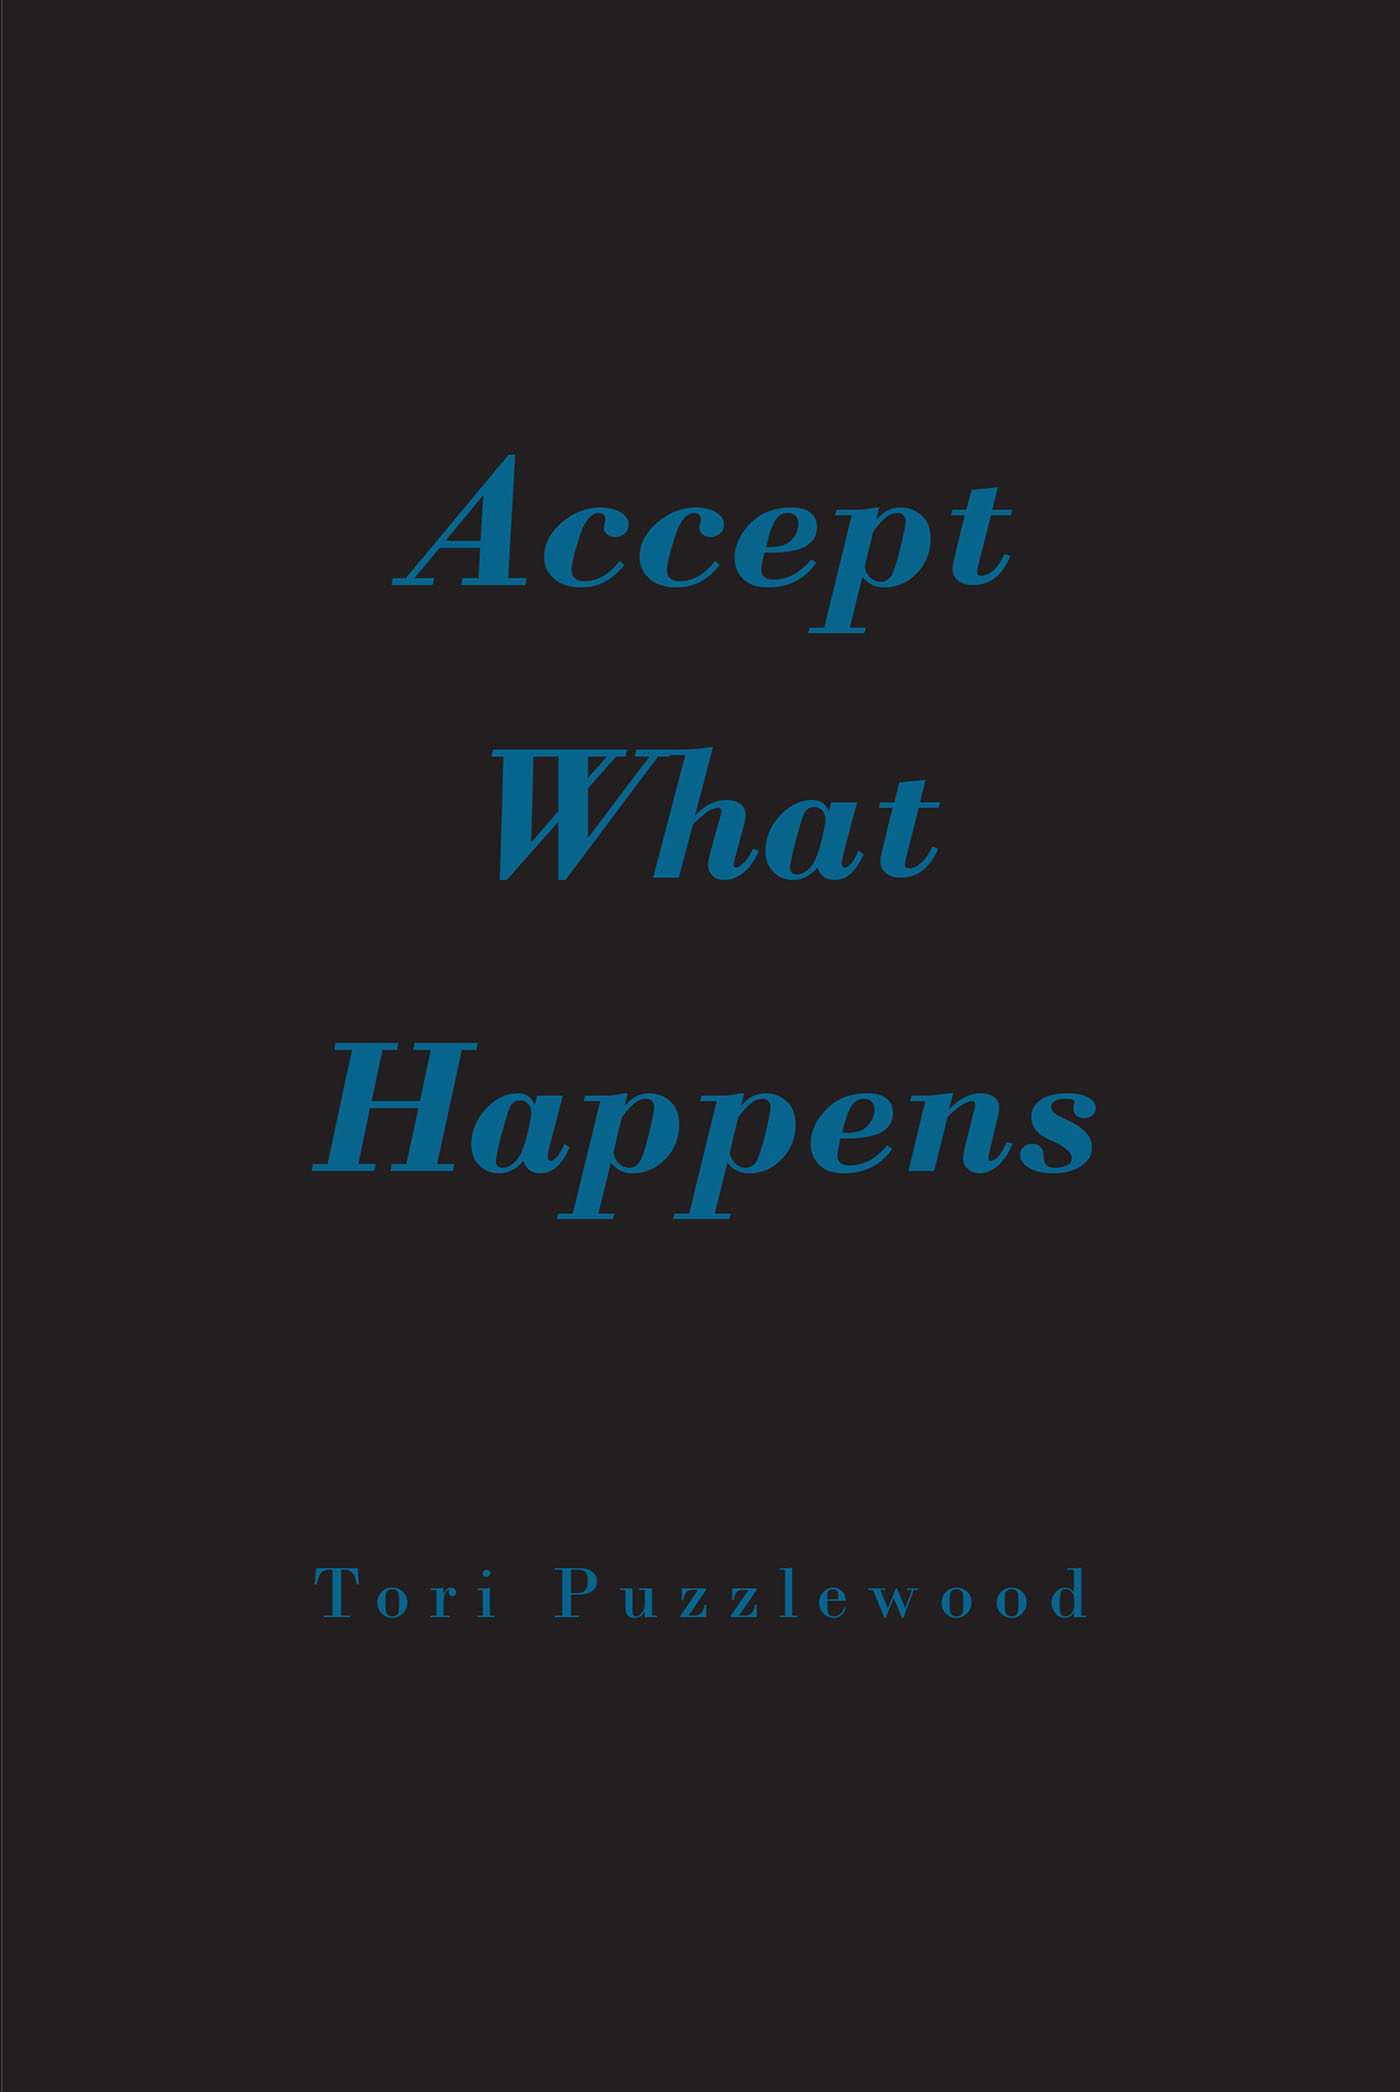 Author Tori Puzzlewood’s New Book, "Accept What Happens," is the Author’s Story of Her Time Going Through High School